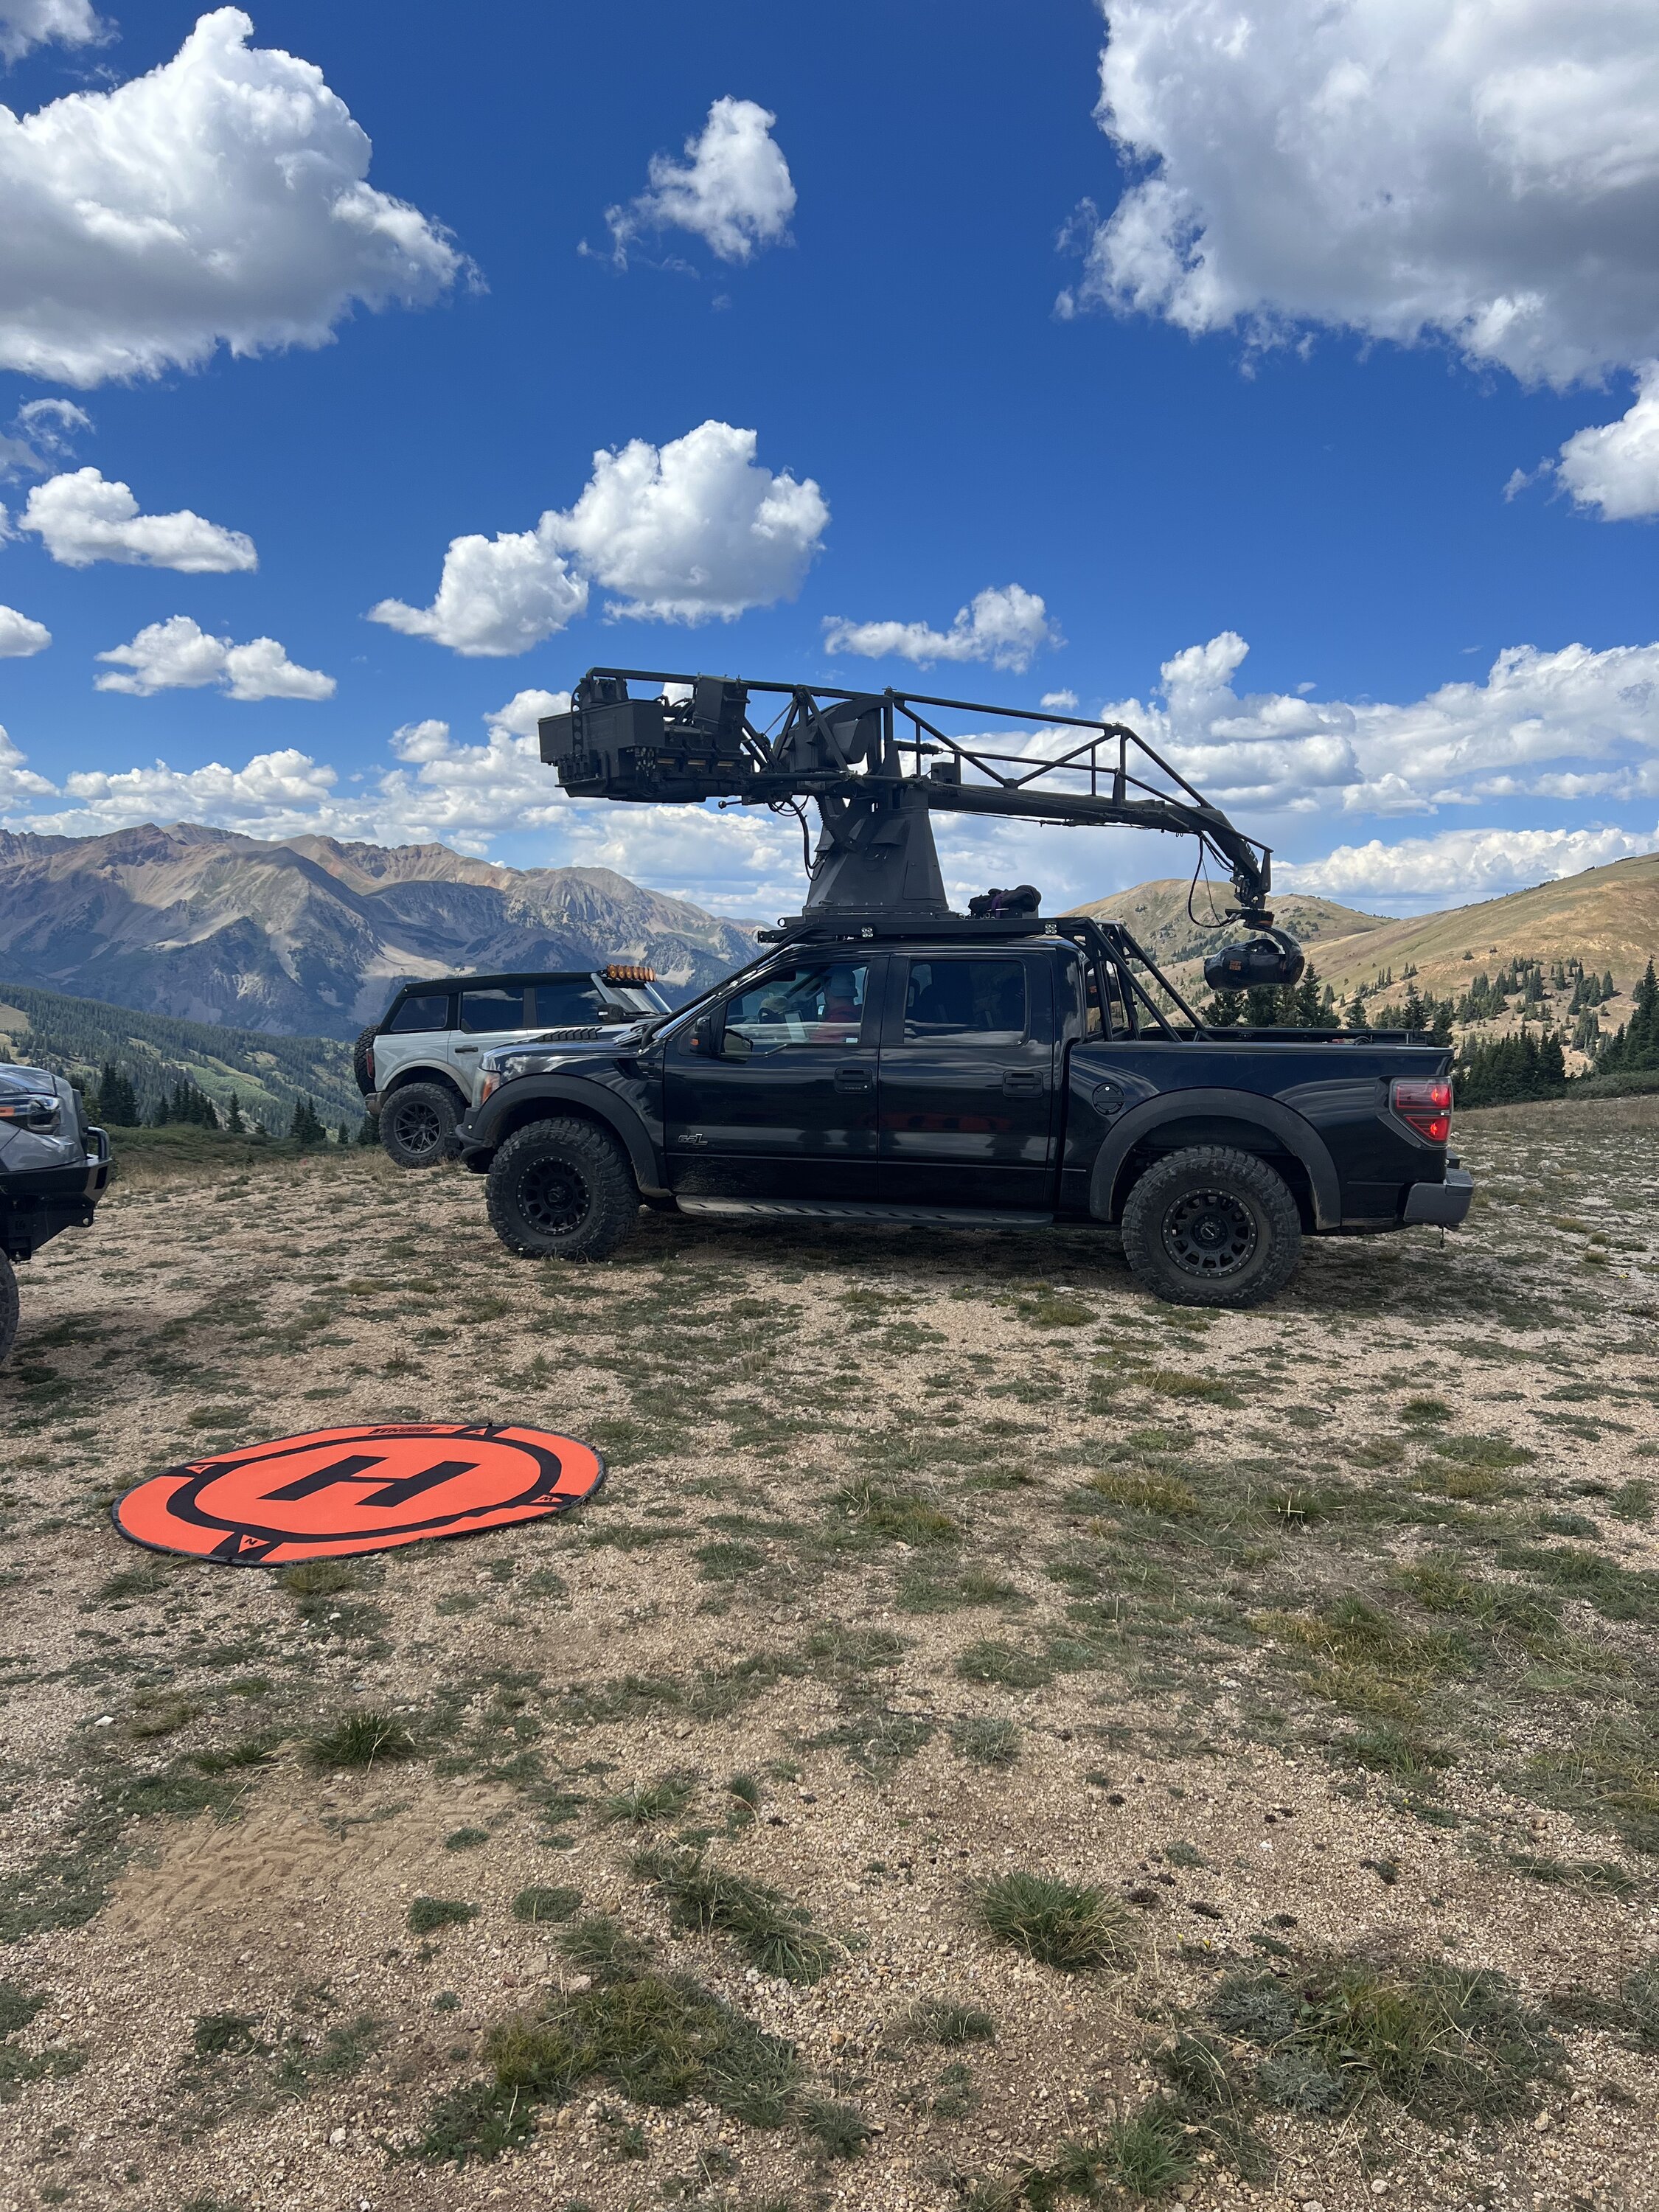 Ford Bronco My Adventure with TOYO Tires to Aspen CO on Commercial Shoot tempImageP1wfp8